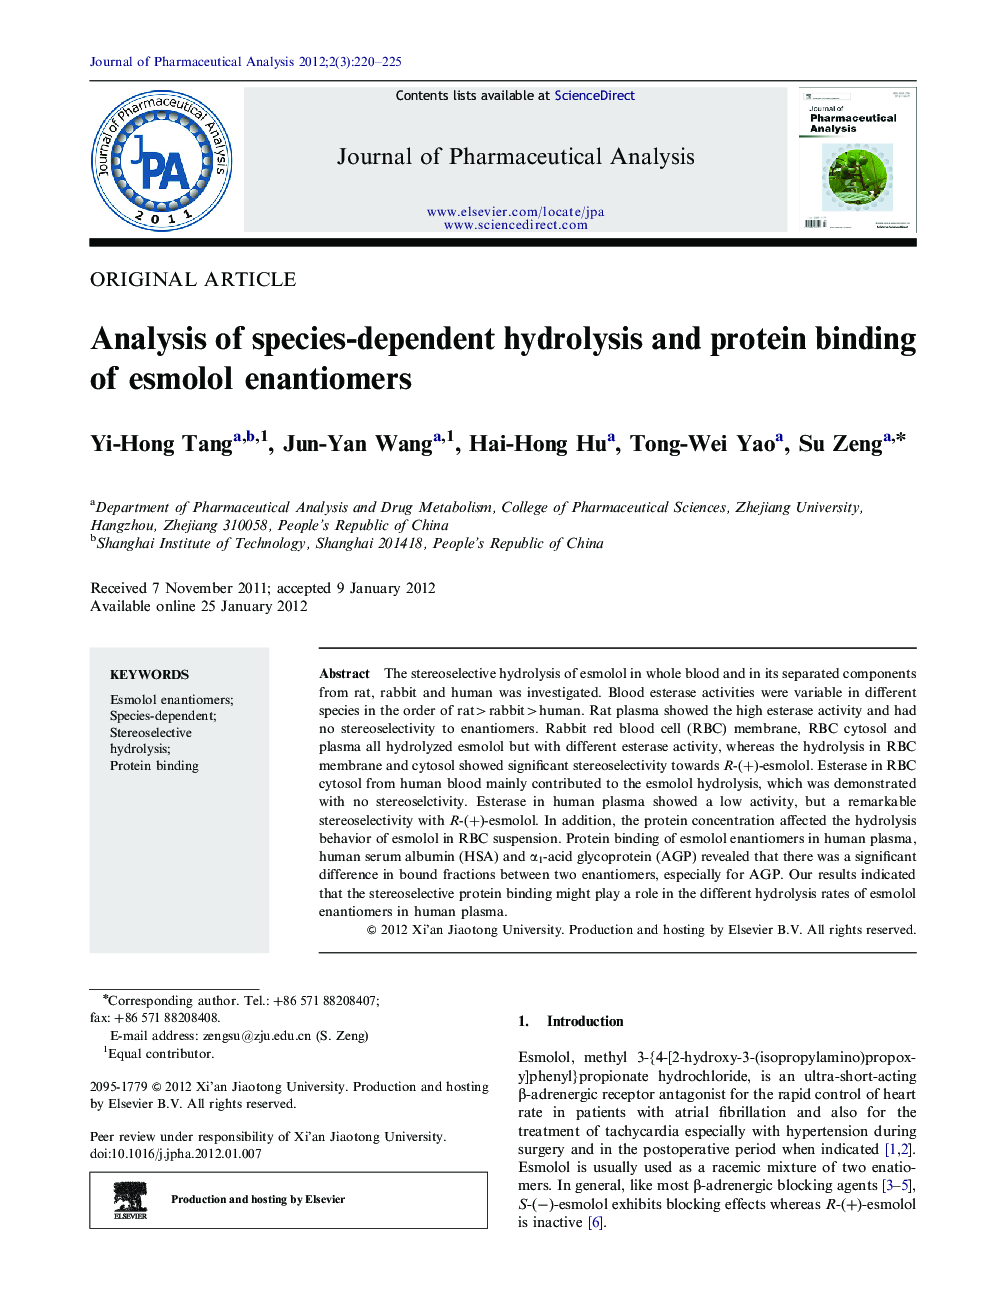 Analysis of species-dependent hydrolysis and protein binding of esmolol enantiomers